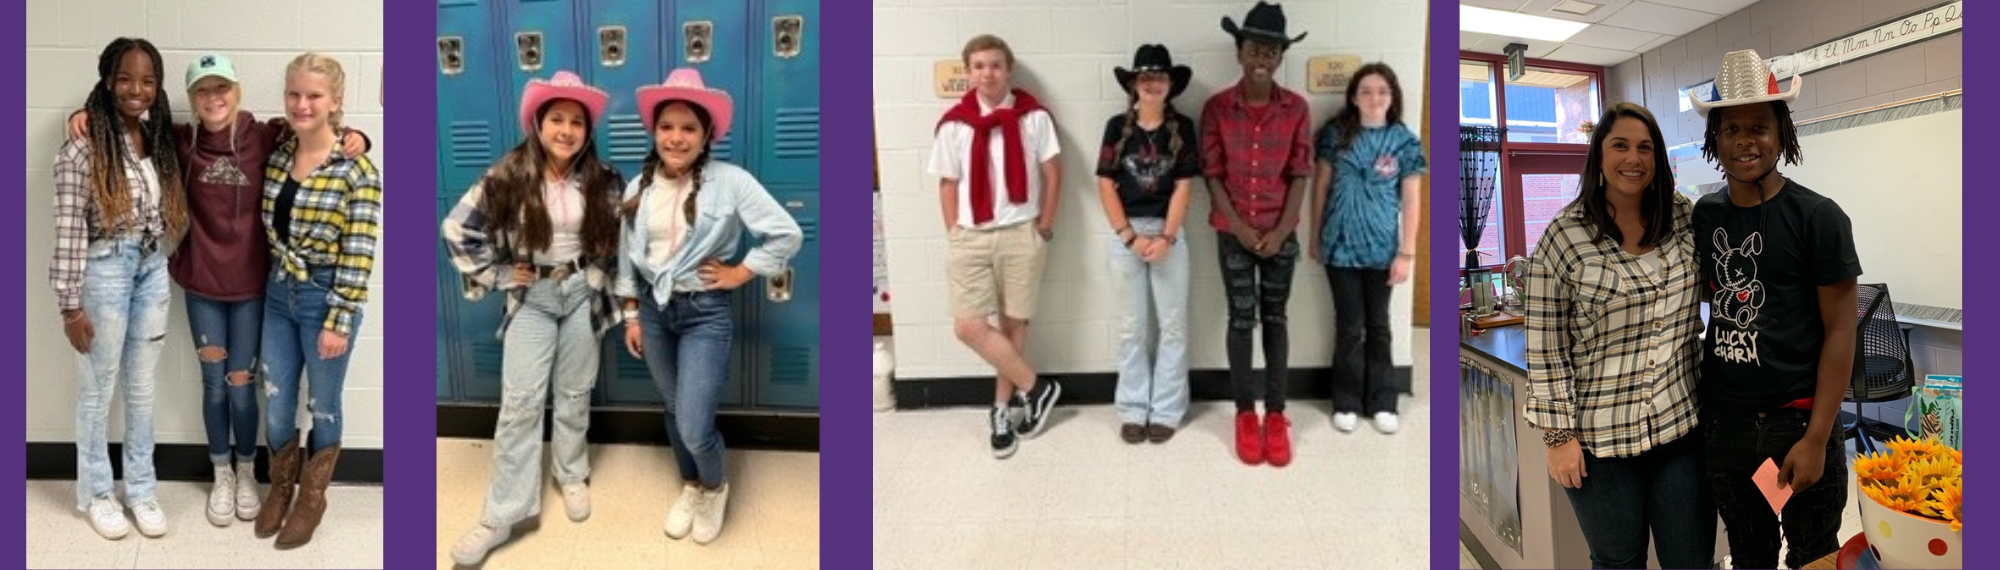 country vs country club day 2022